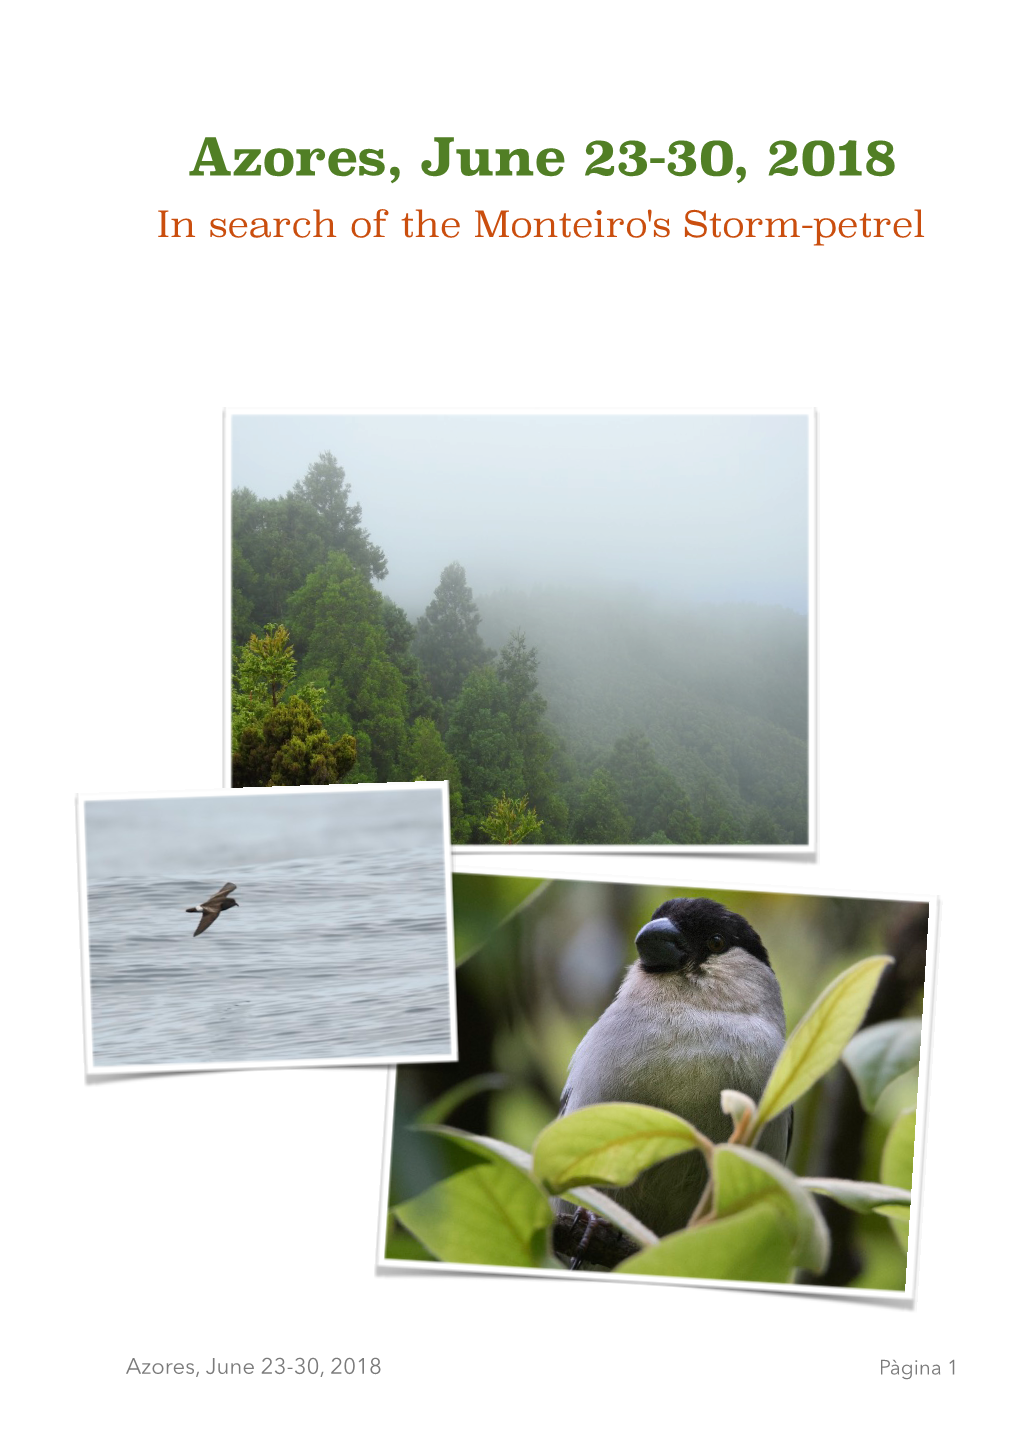 Azores, June 23-30, 2018 in Search of the Monteiro's Storm-Petrel